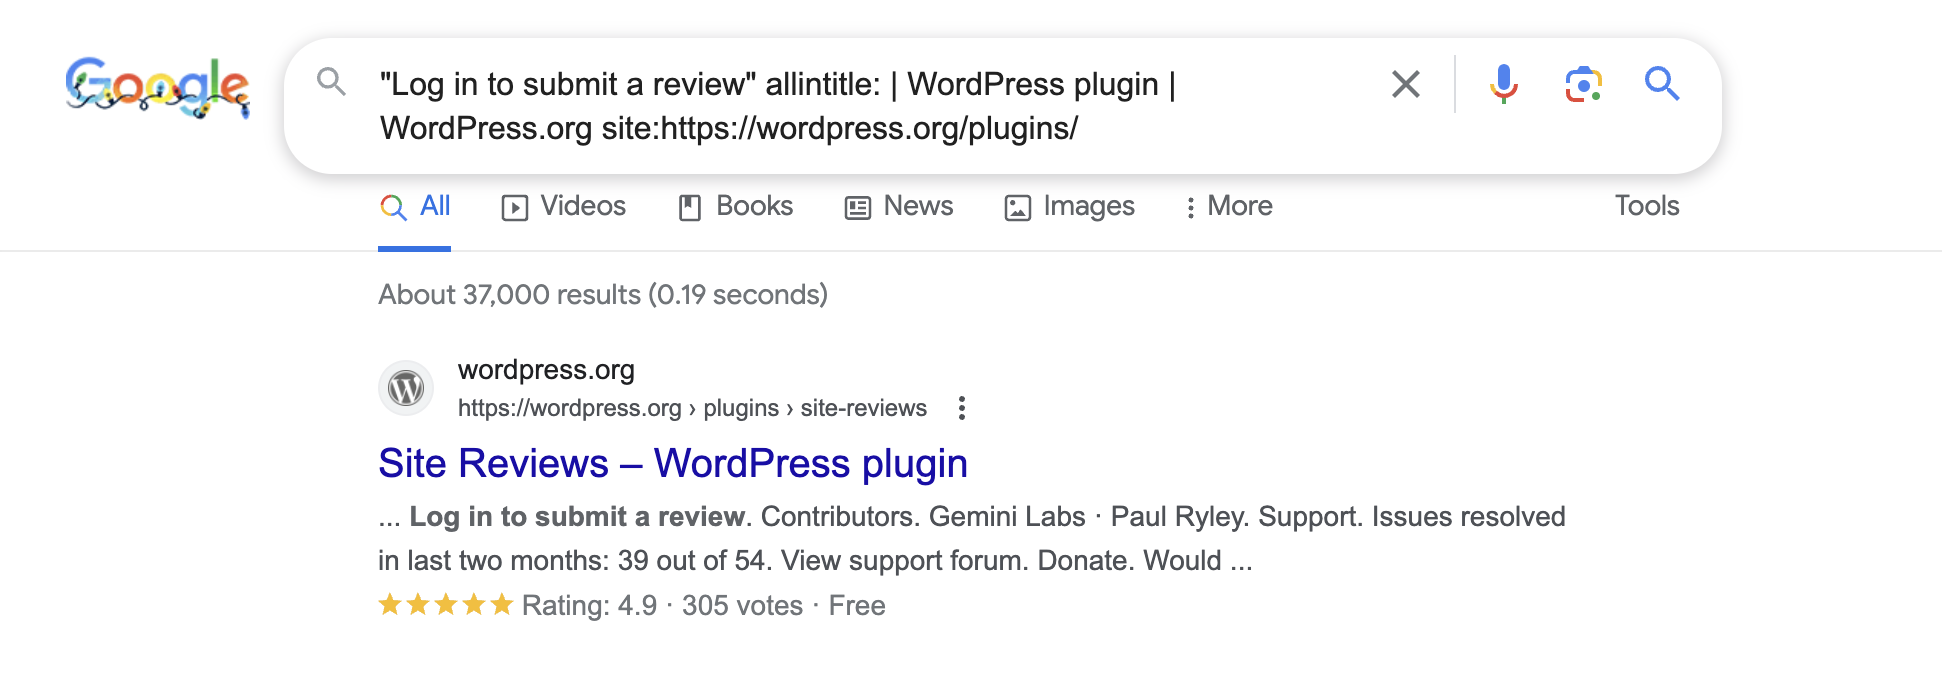 how many free wordpress plugins are there